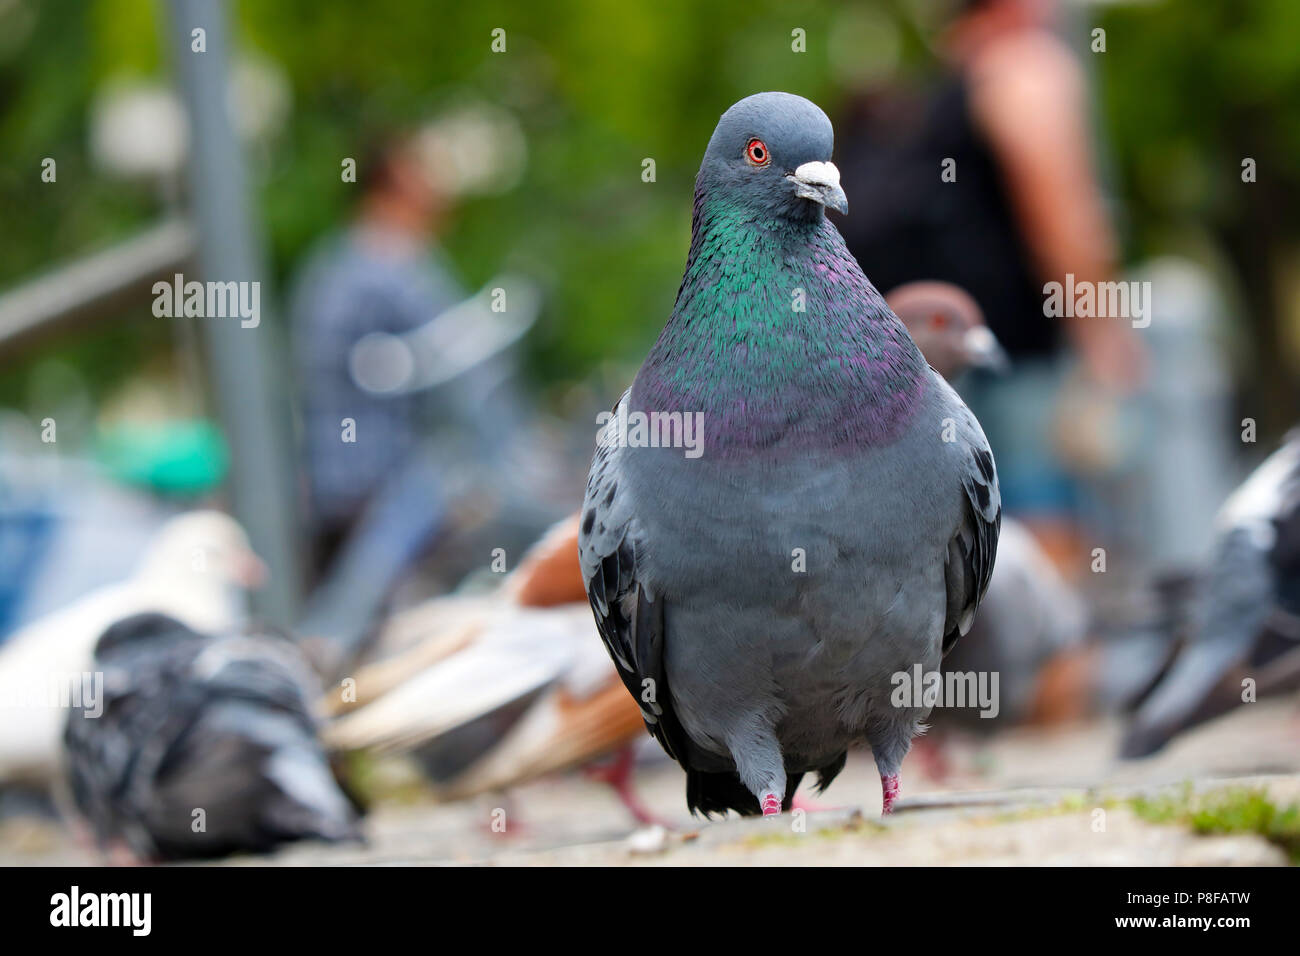 Rock pigeon (columba livia) in frontal view sitting on the ground in front of blurry pigeons and people Stock Photo